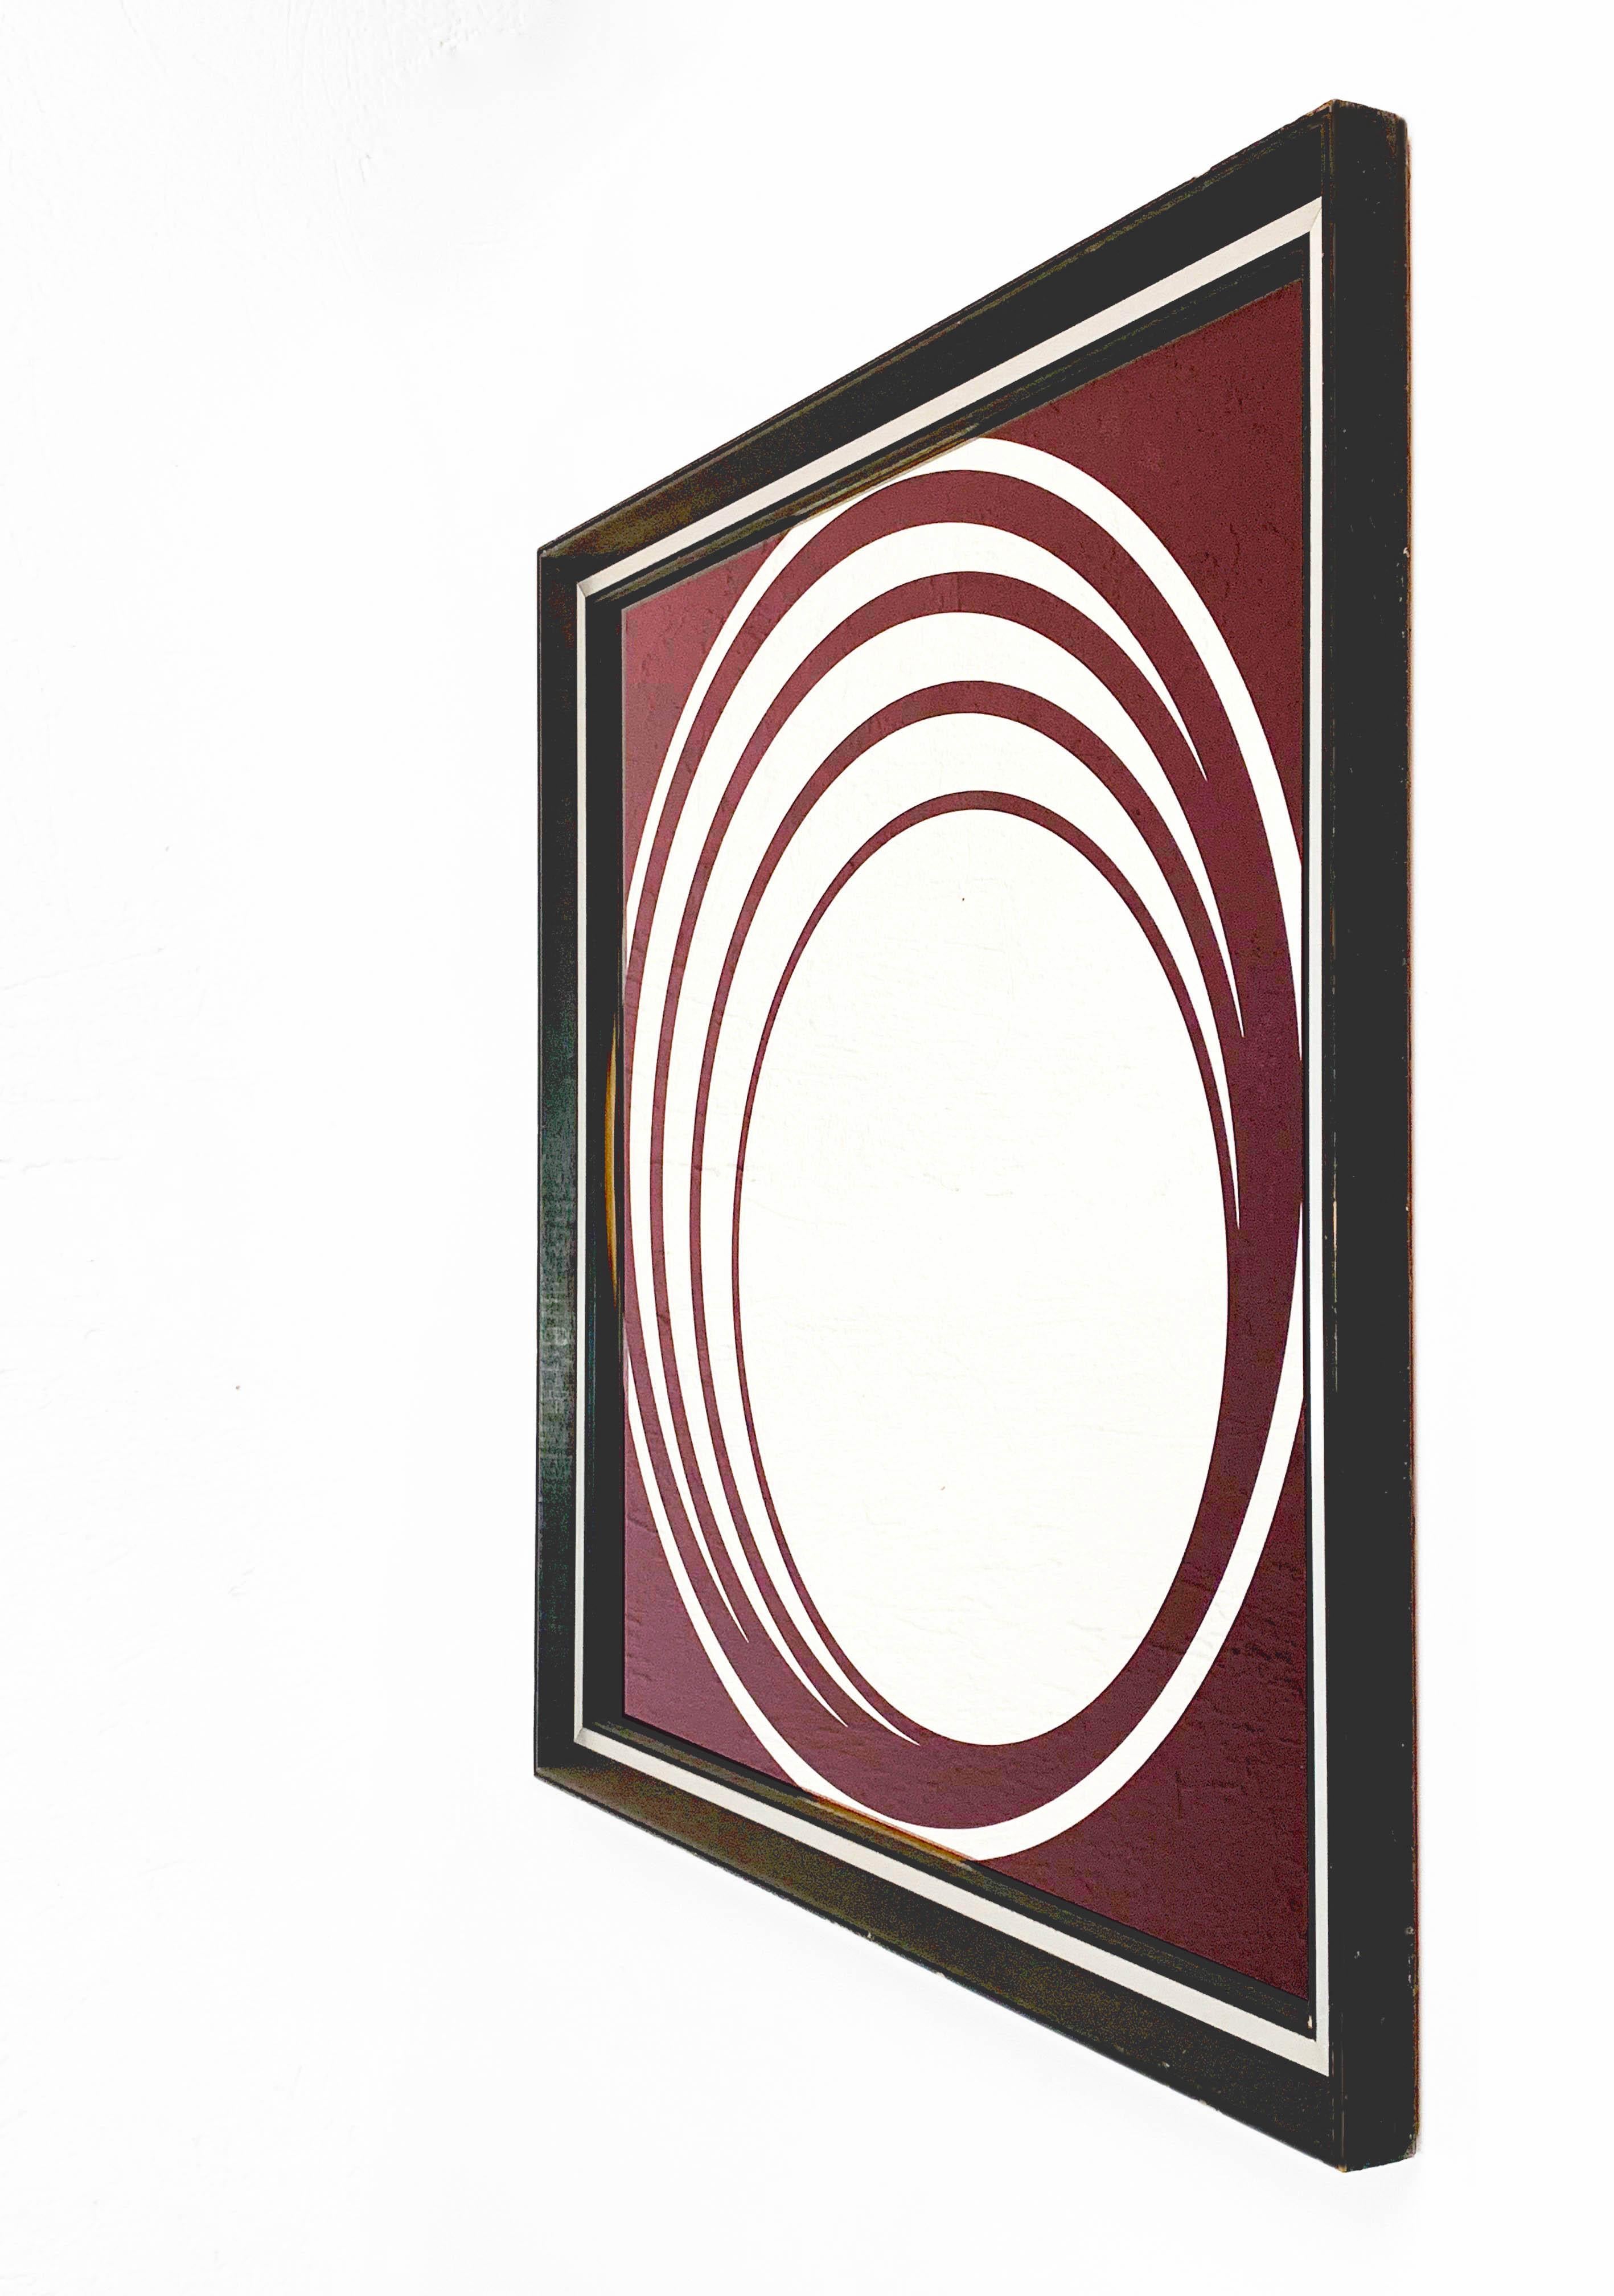 Midcentury British burgundy wall mirror with optical effect after Verner Panton with a black frame.

It is an English vintage piece from the 1970s with an iconic vertigo optical effect.

A funky and elegant piece the will deep a midcentury